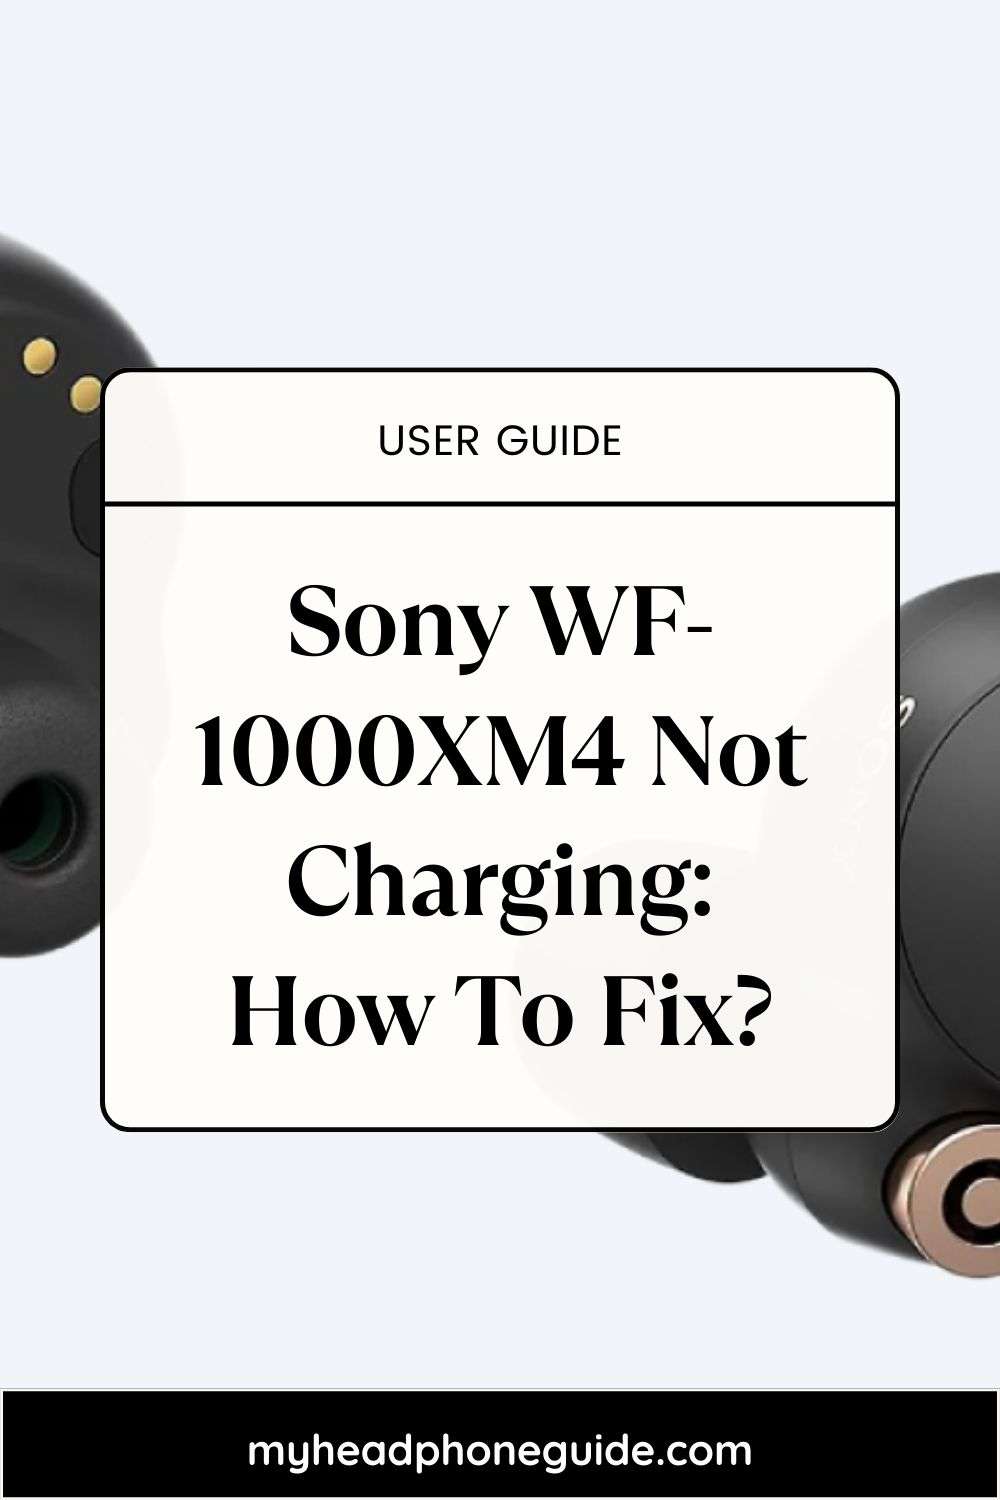 Sony WF-1000XM4 Not Charging: How To Fix?